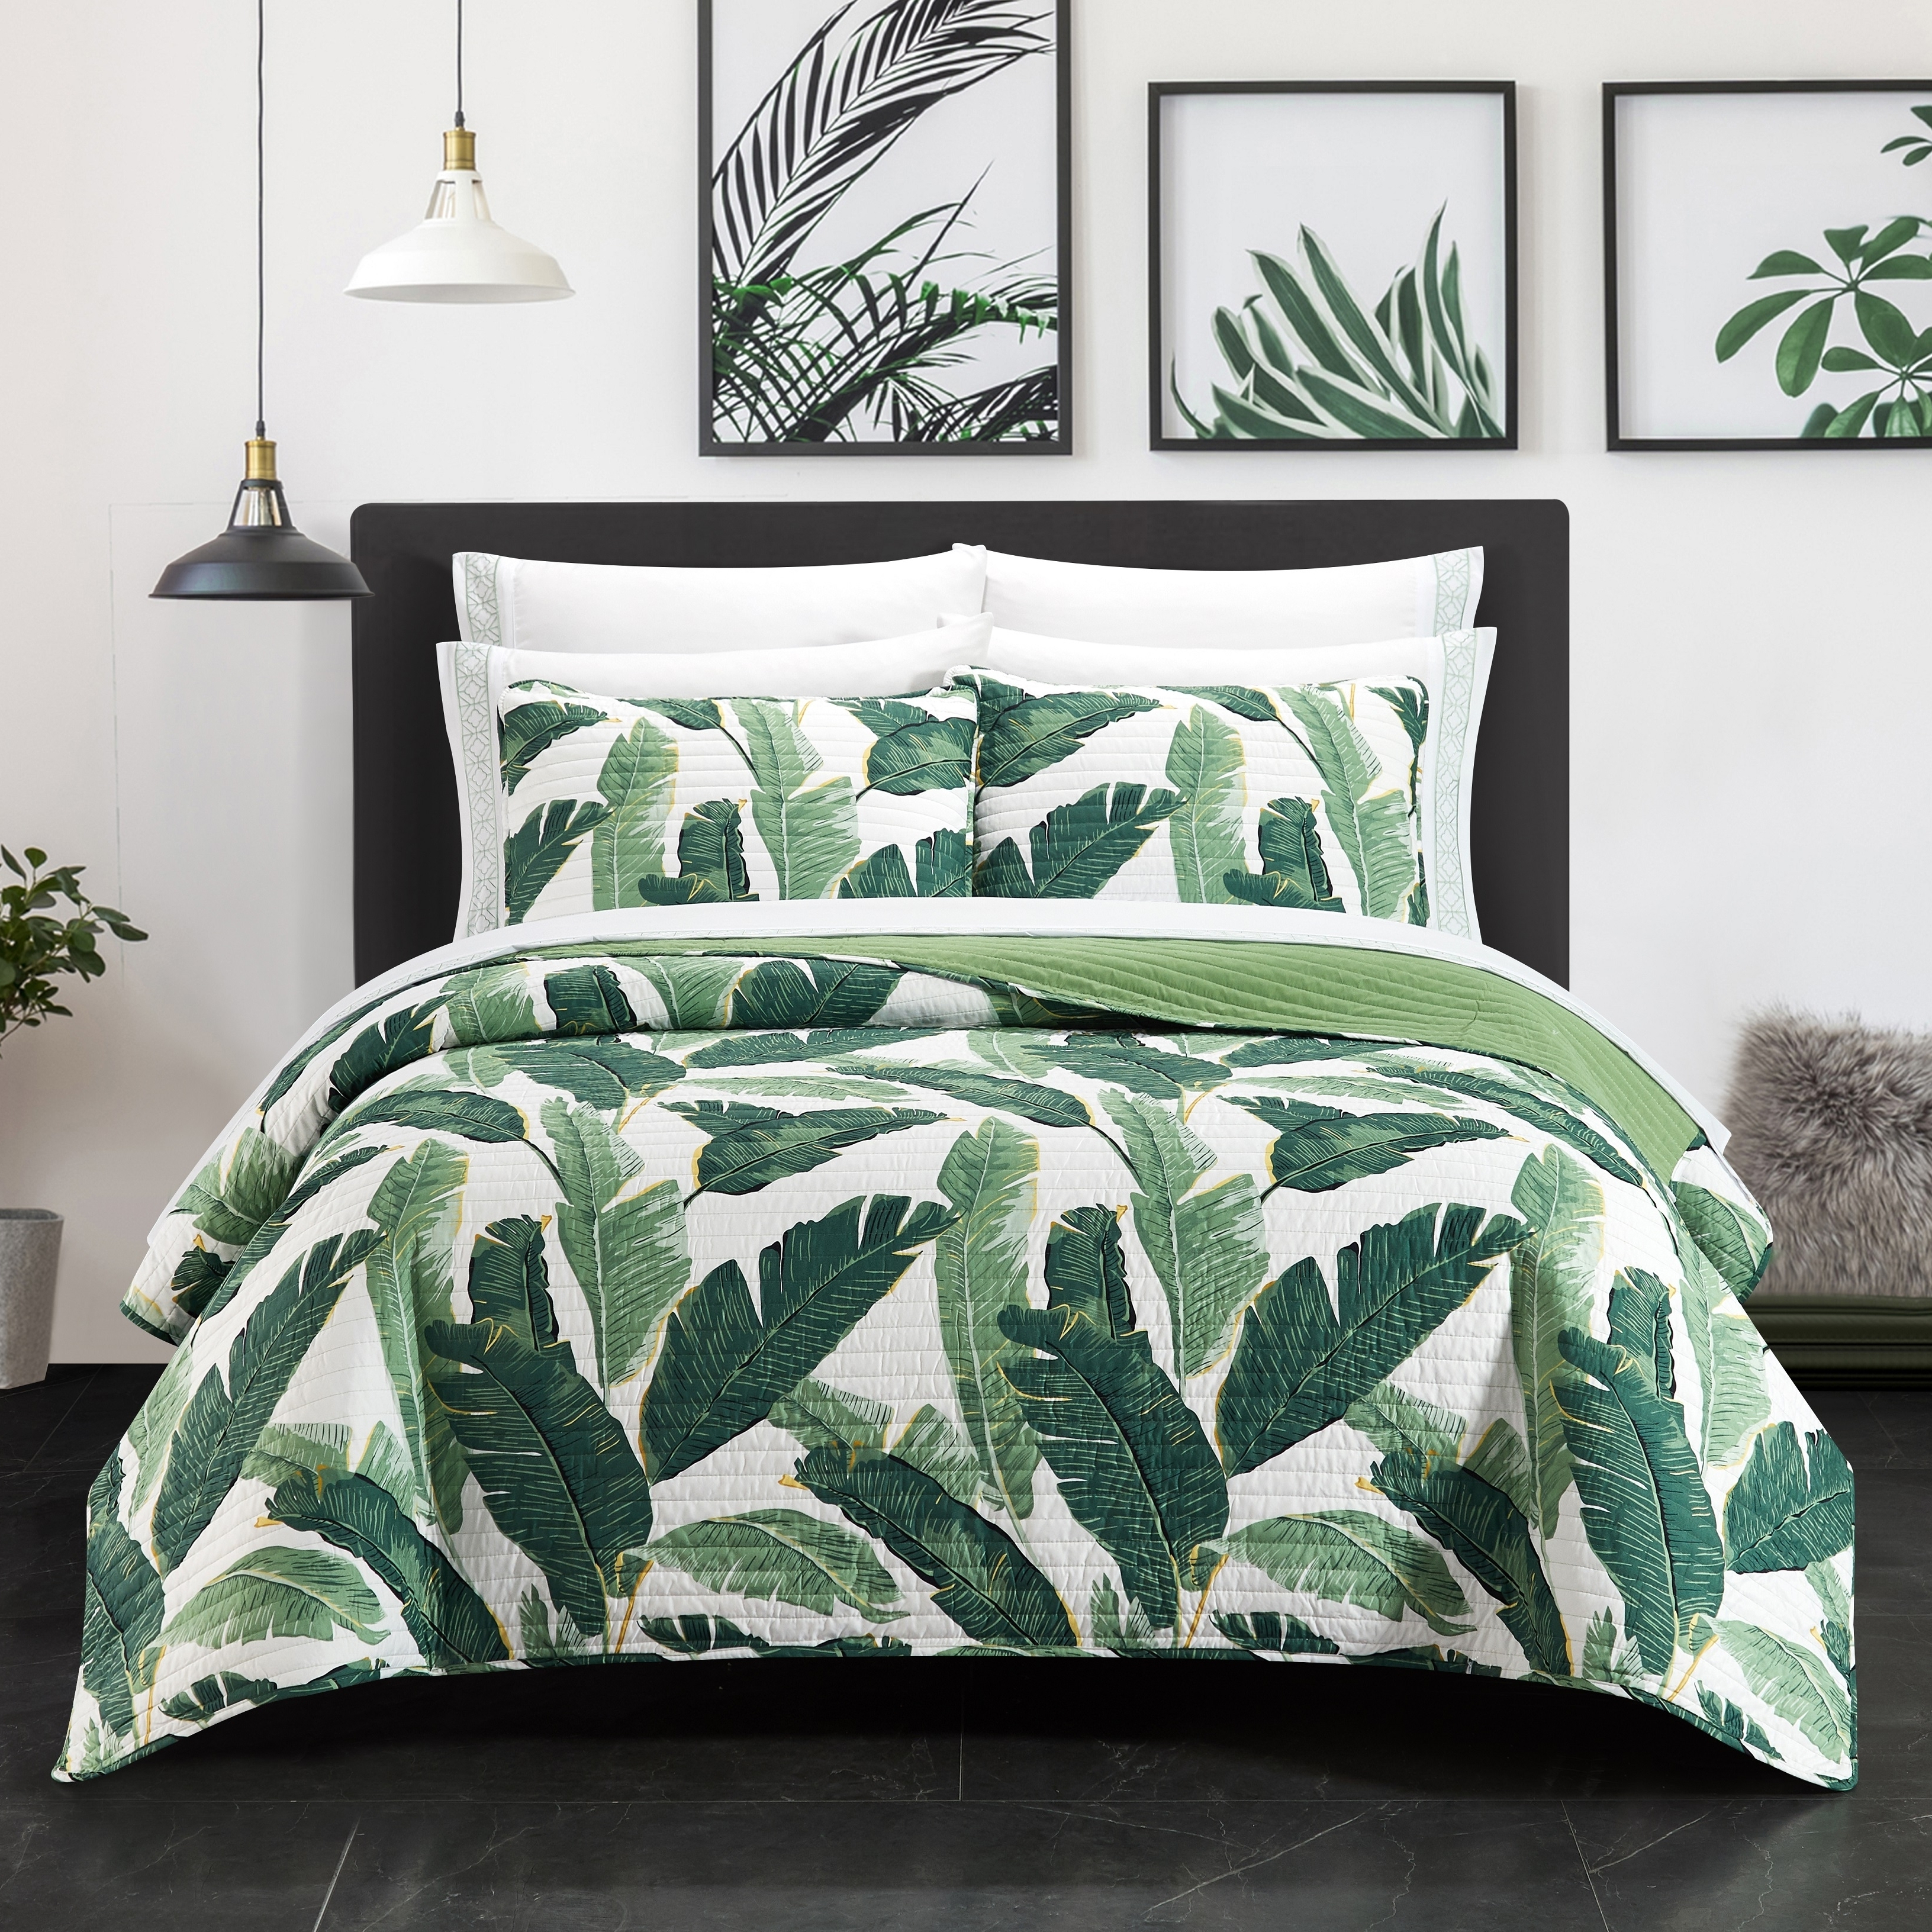 Palm Spring 9 Or 6 Piece Quilt Set Watercolor Floral Pattern Print Bed In A Bag - Green, Twin